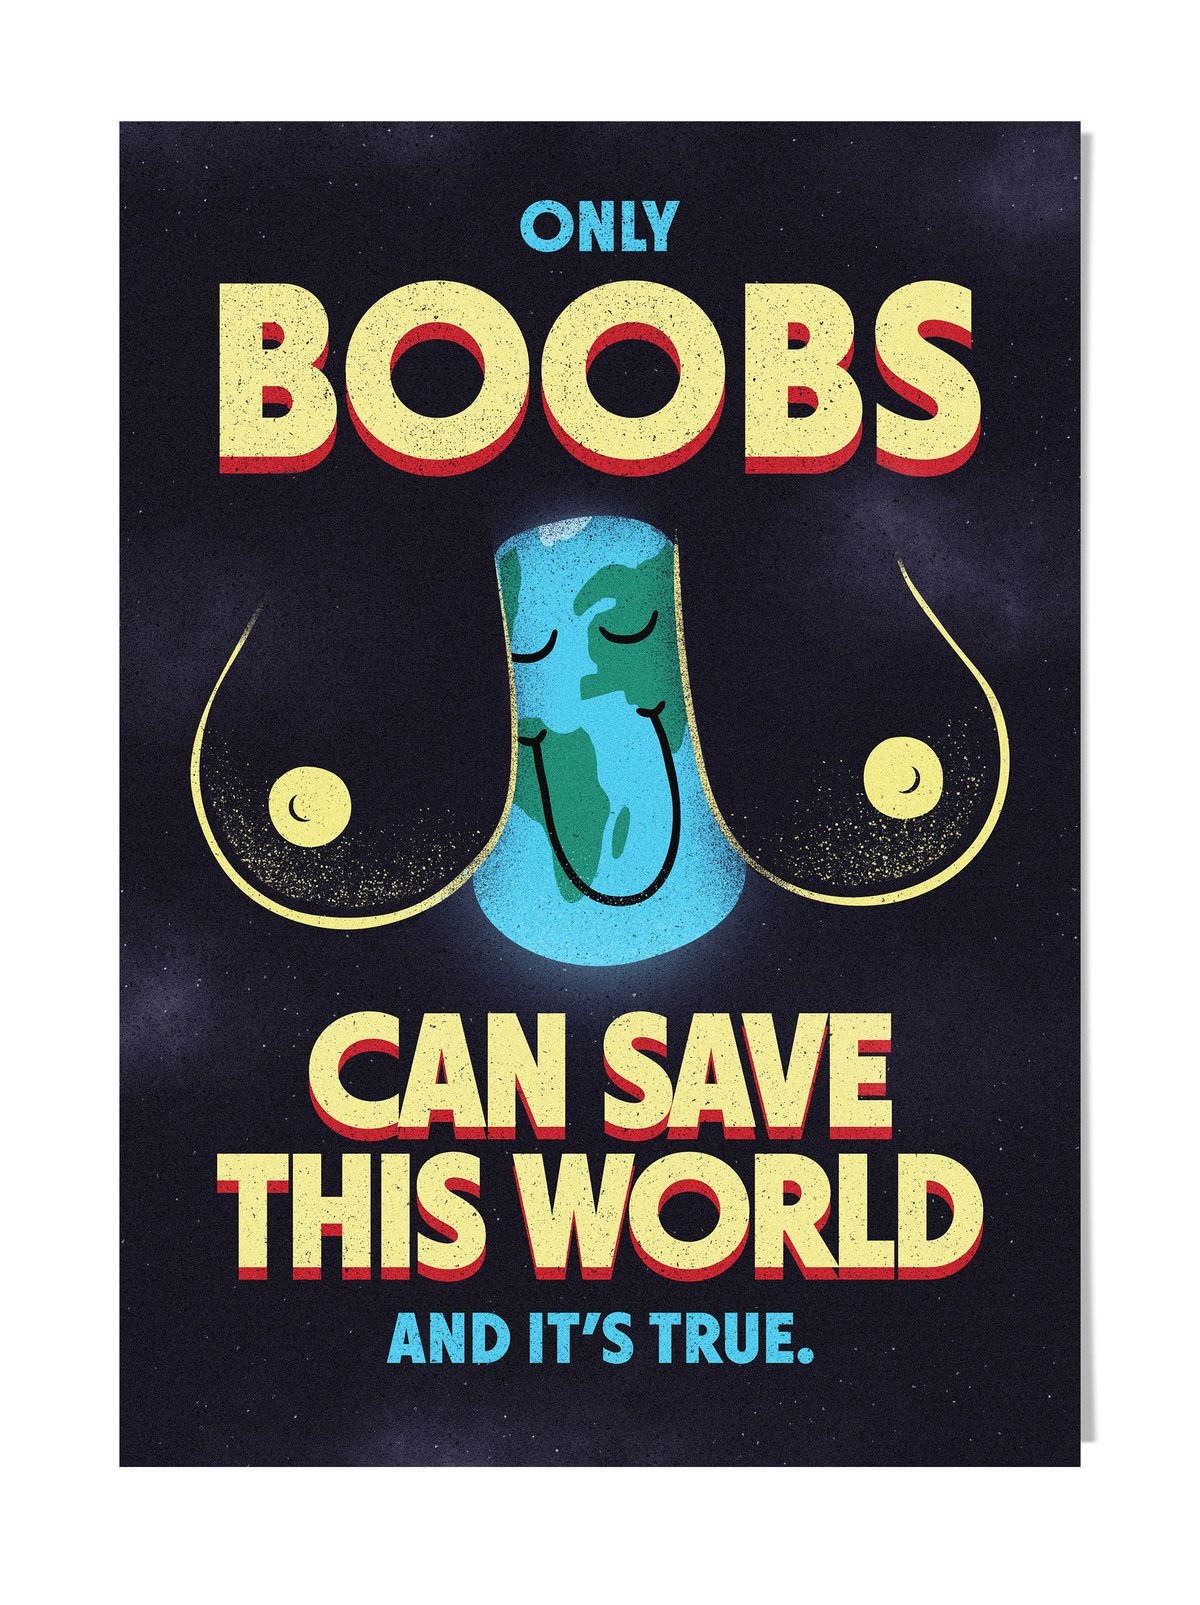 Image of Only boobs can save this world